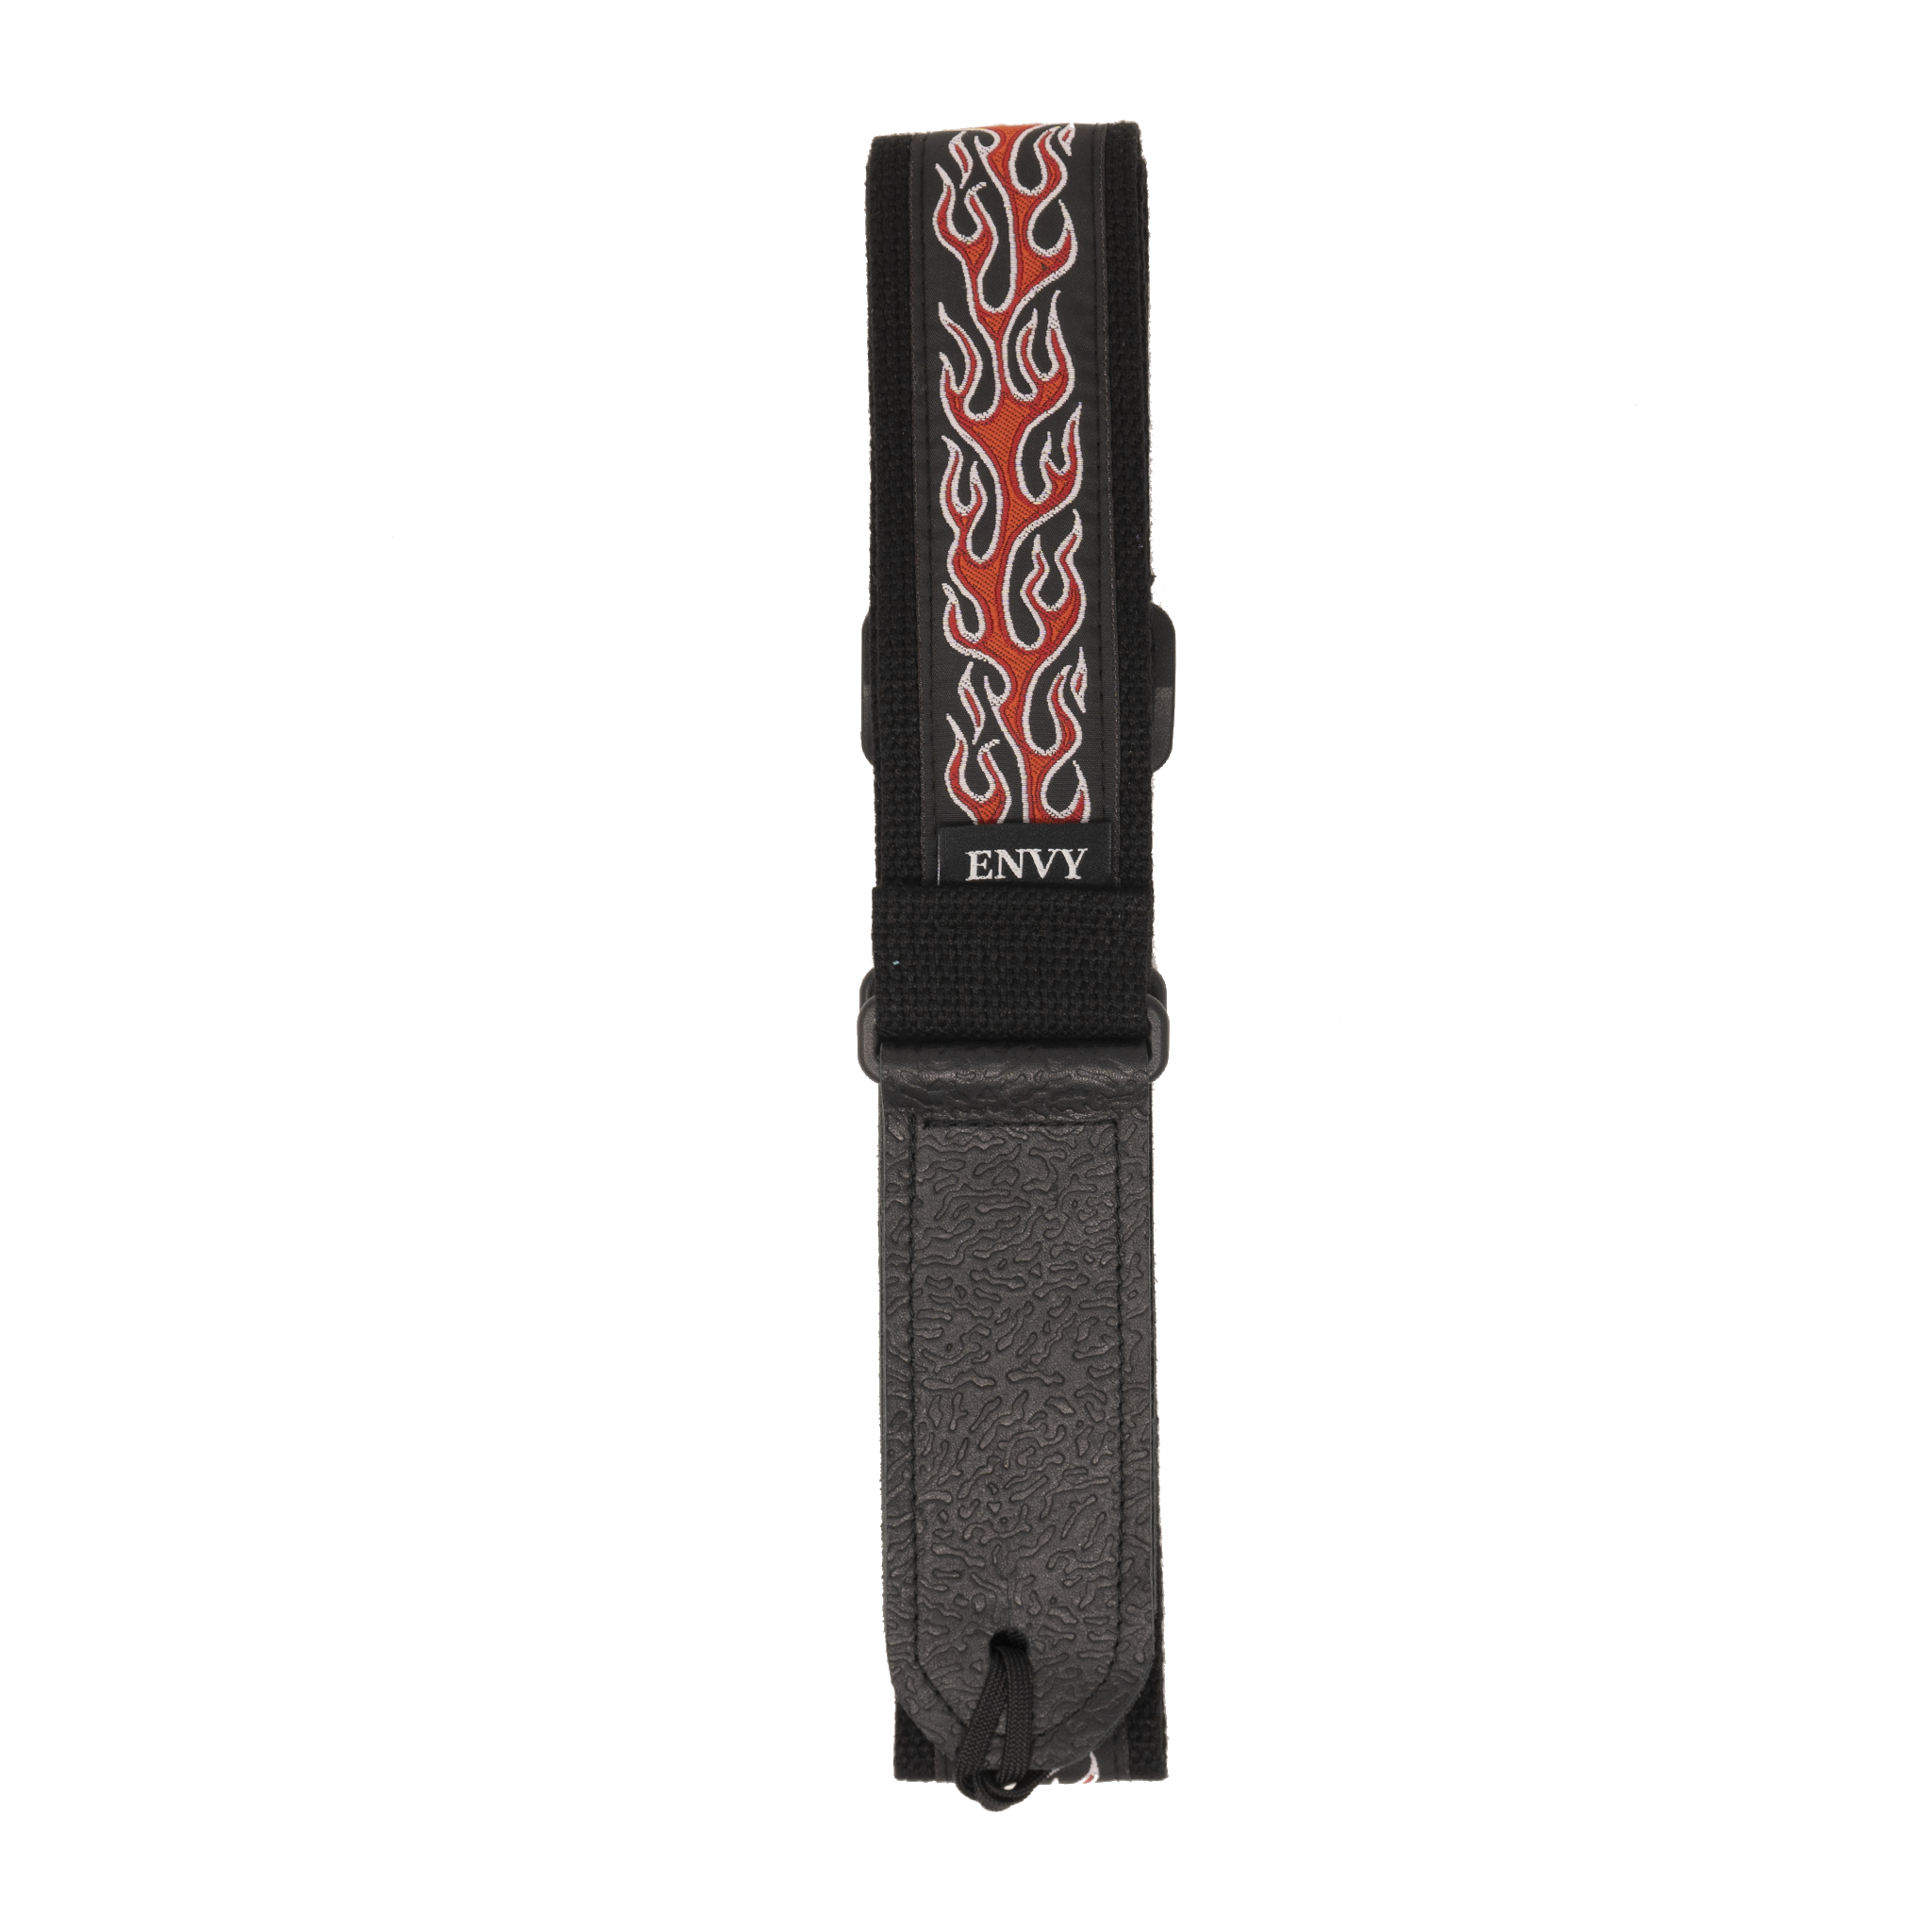 My Fave Guitar Strap in Red Flame